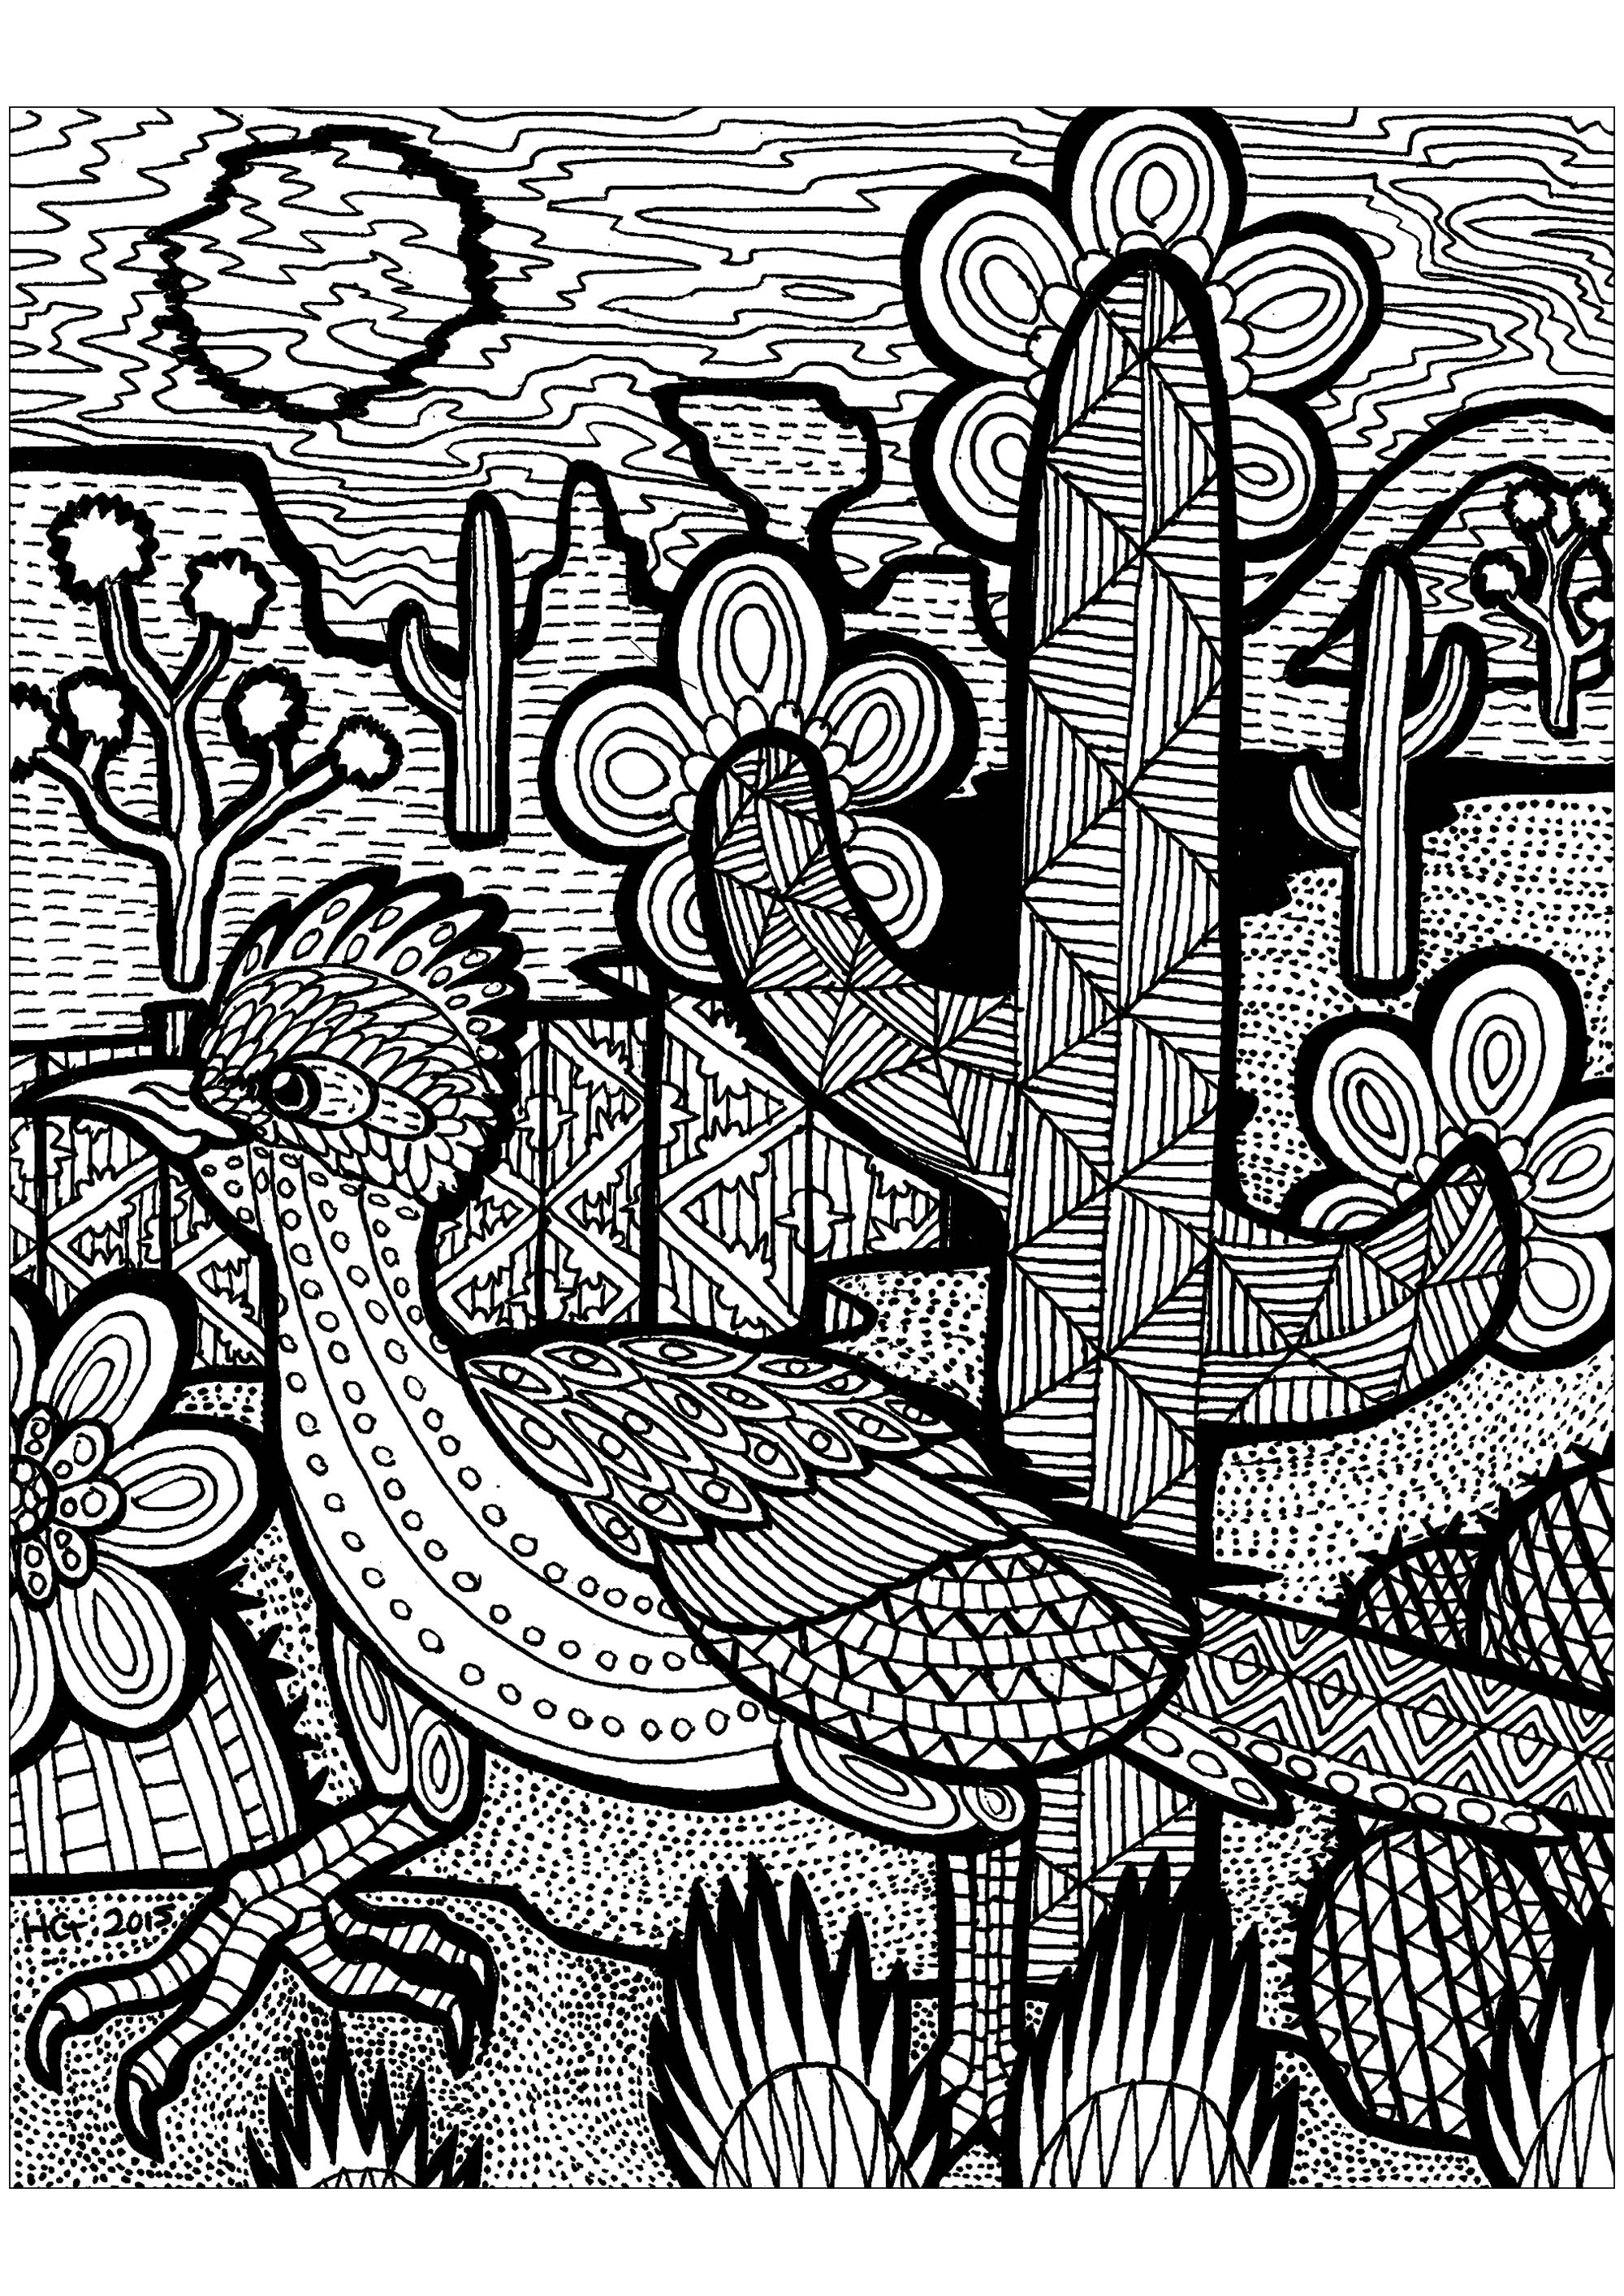 Download Patterns of the desert - Zentangle Adult Coloring Pages